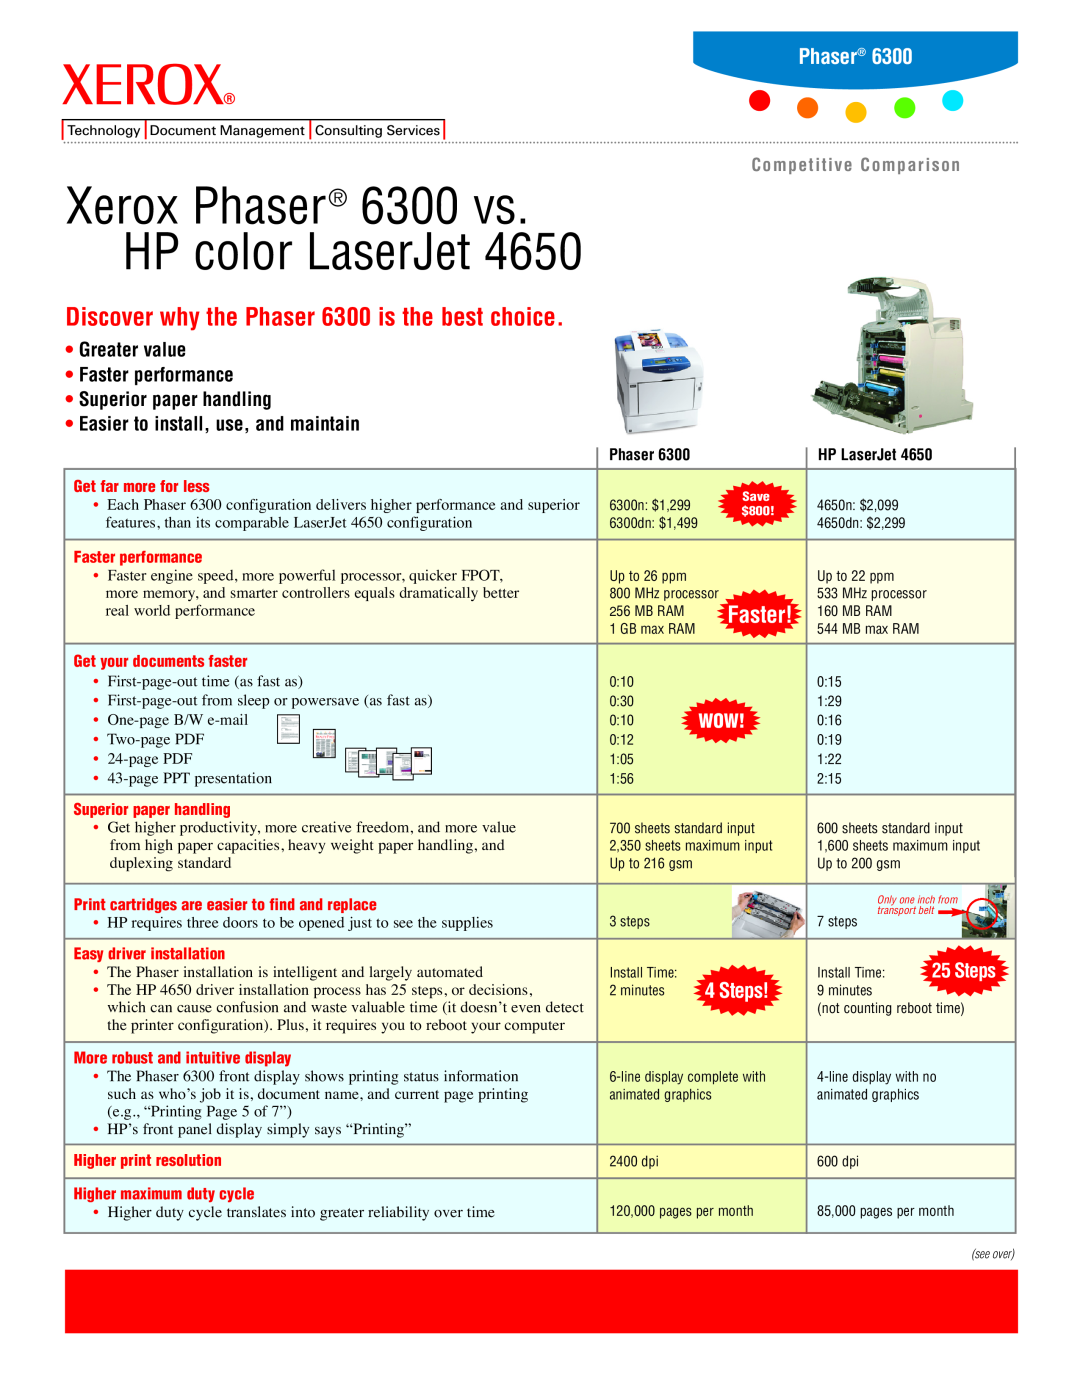 Xerox manual Quick, Guide, Reference, Phaser 6300/6350, color laser printer, Rev A 